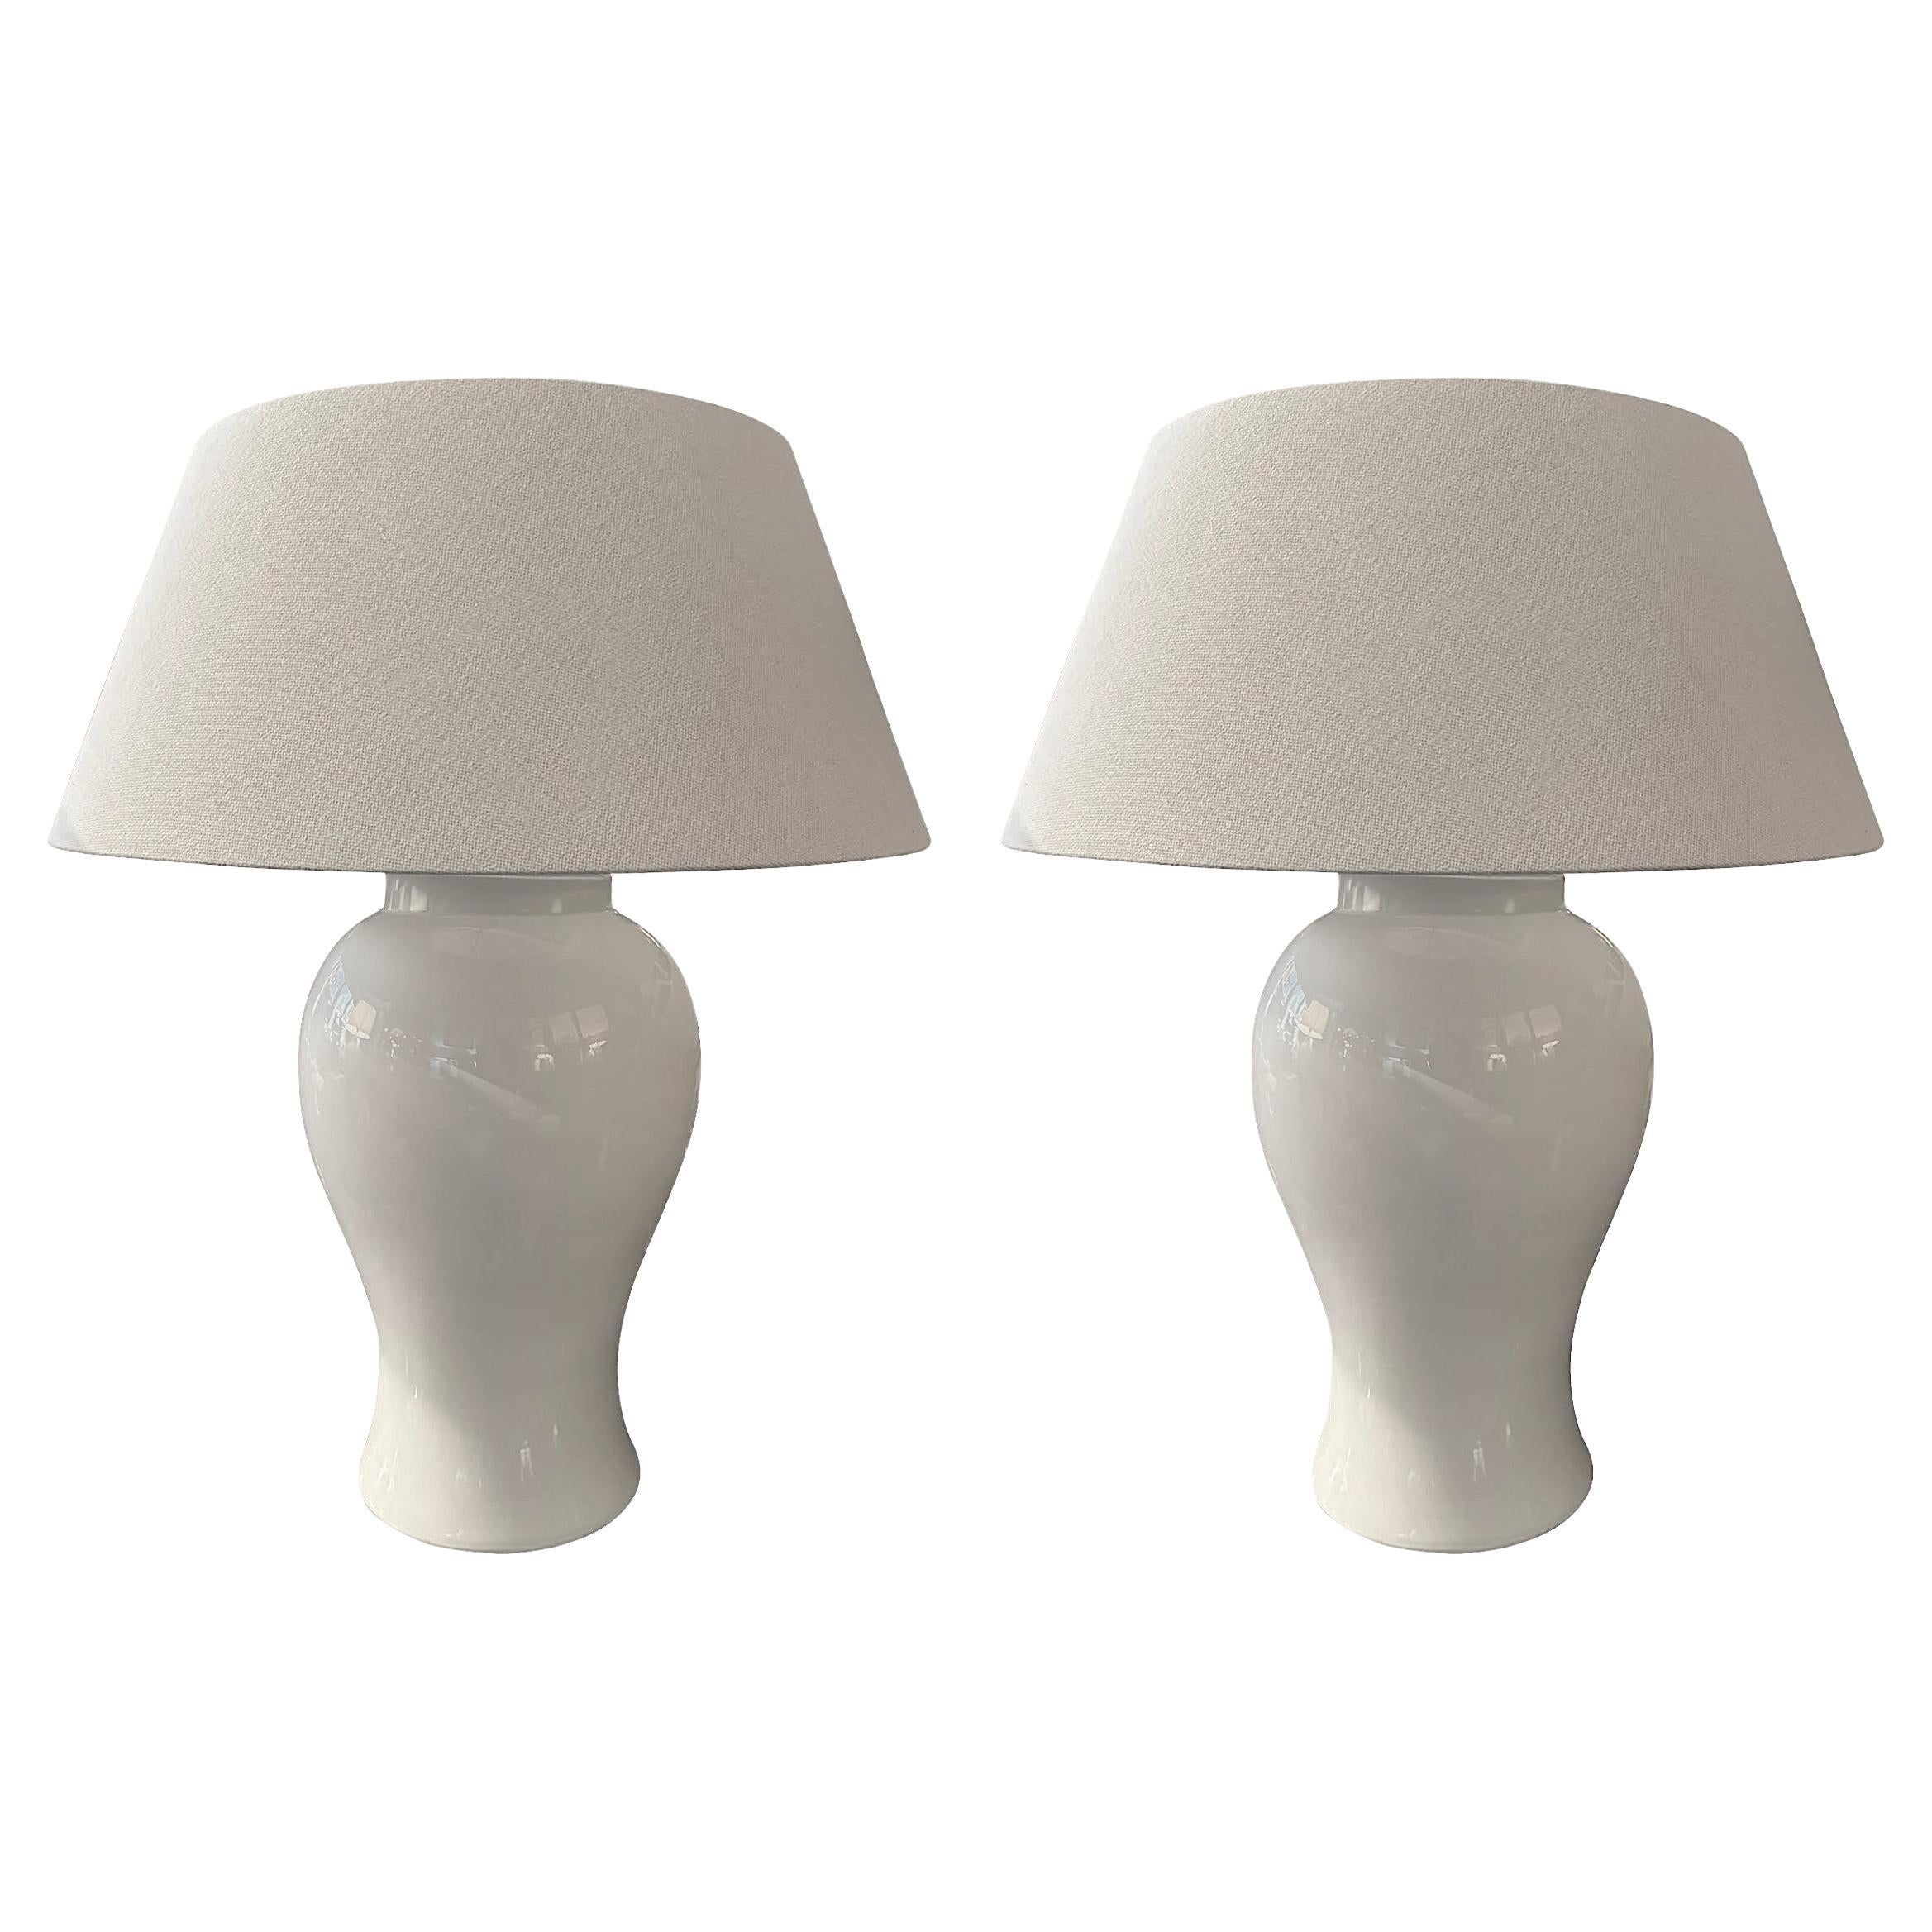 White Extra Large Classic Shaped Pair Of Lamps, China, Contemporary